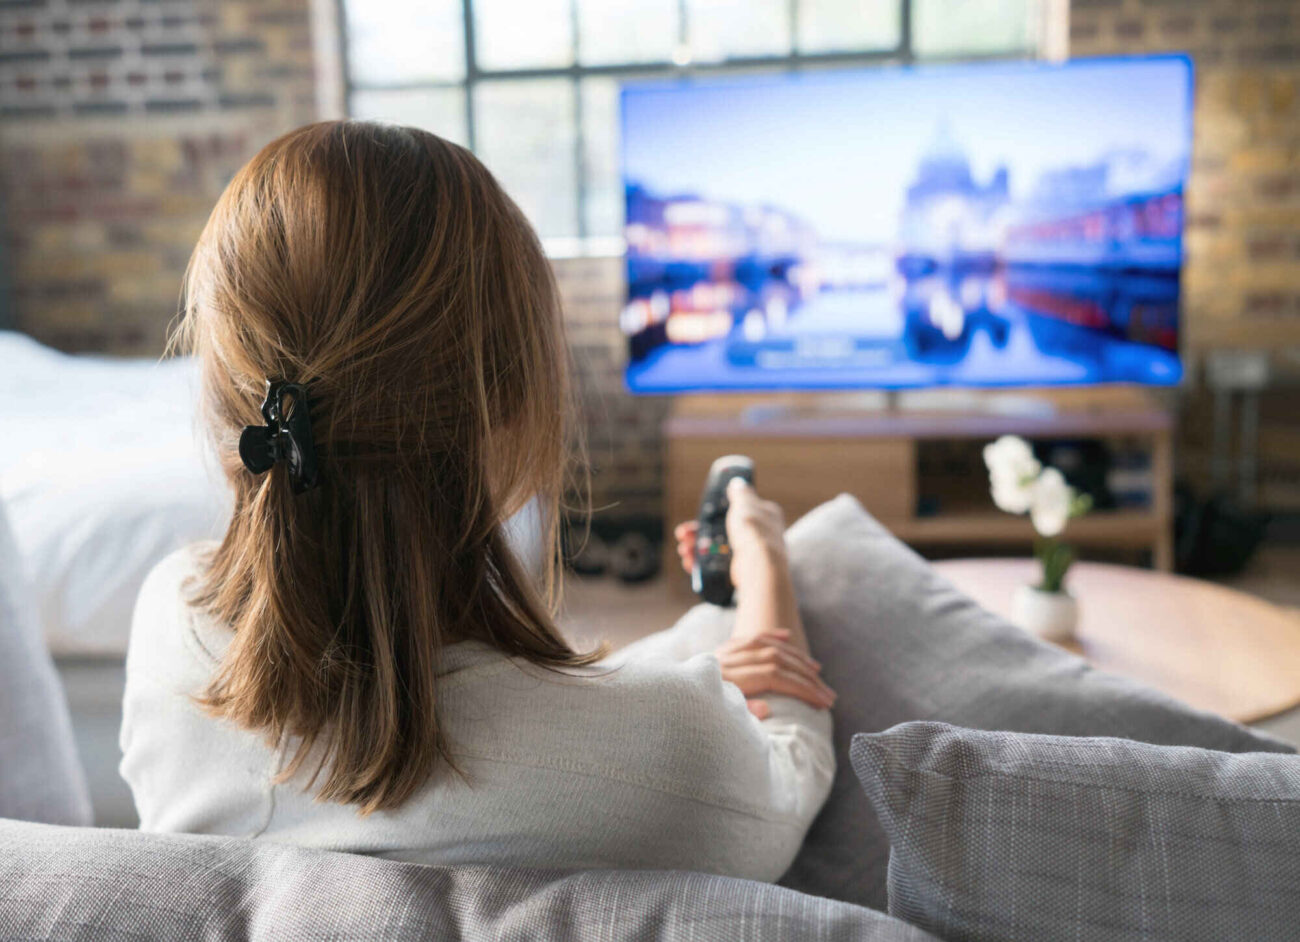 Want to make the most out of using HBO Max on services like Hulu or Amazon? Find out how to get the best streaming experience possible here.